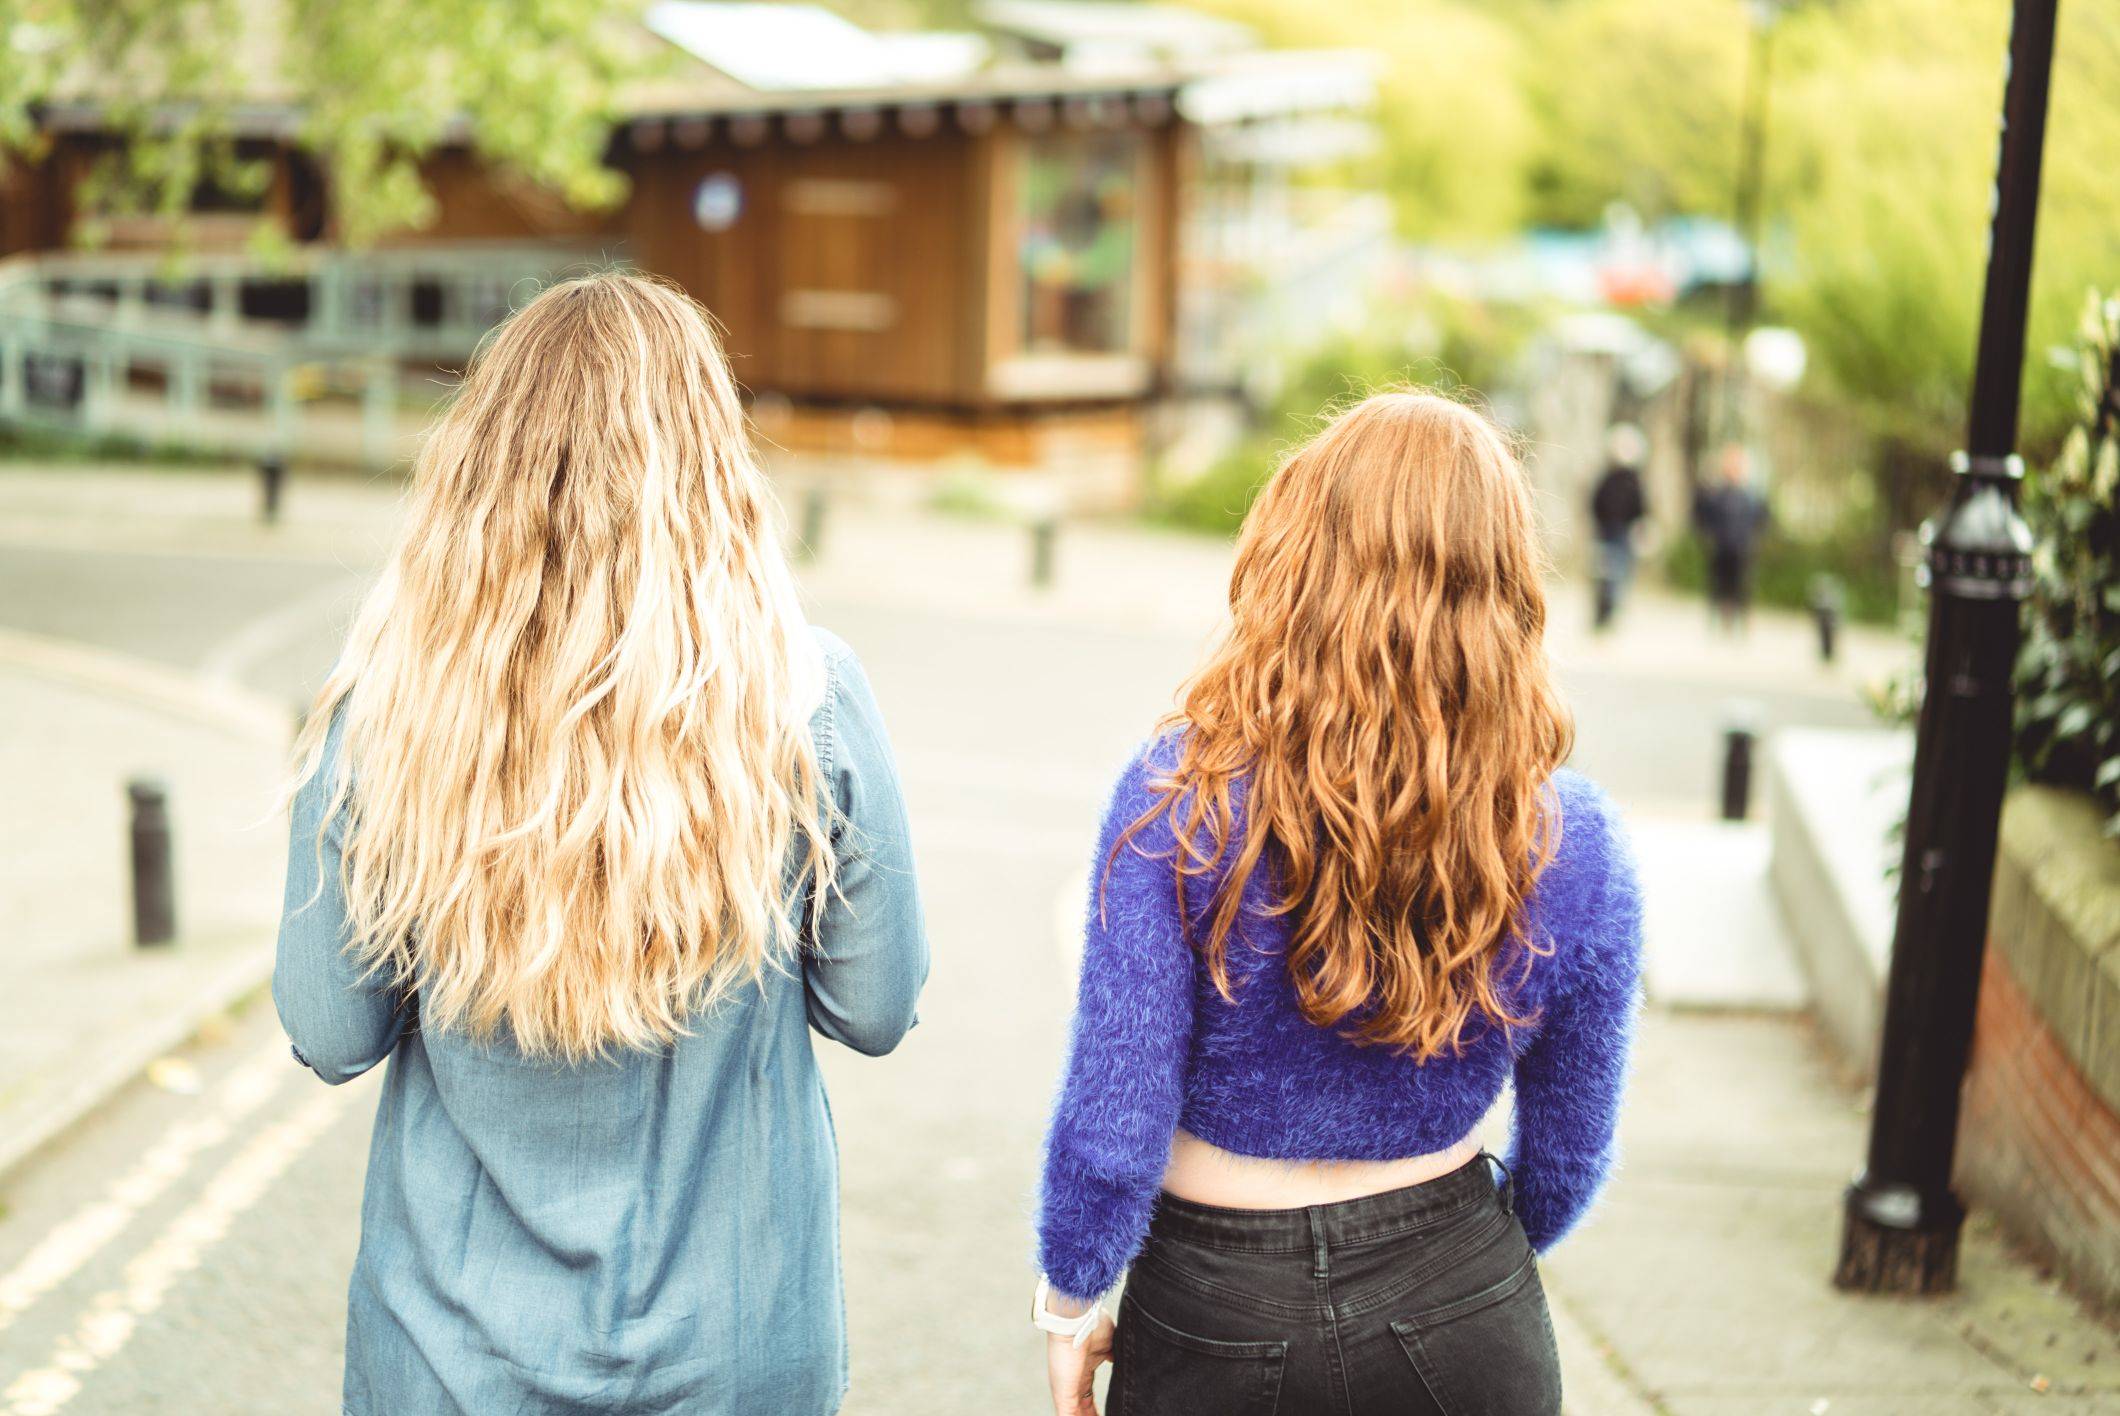 Image of two girls walking down road with their wavy hair on display